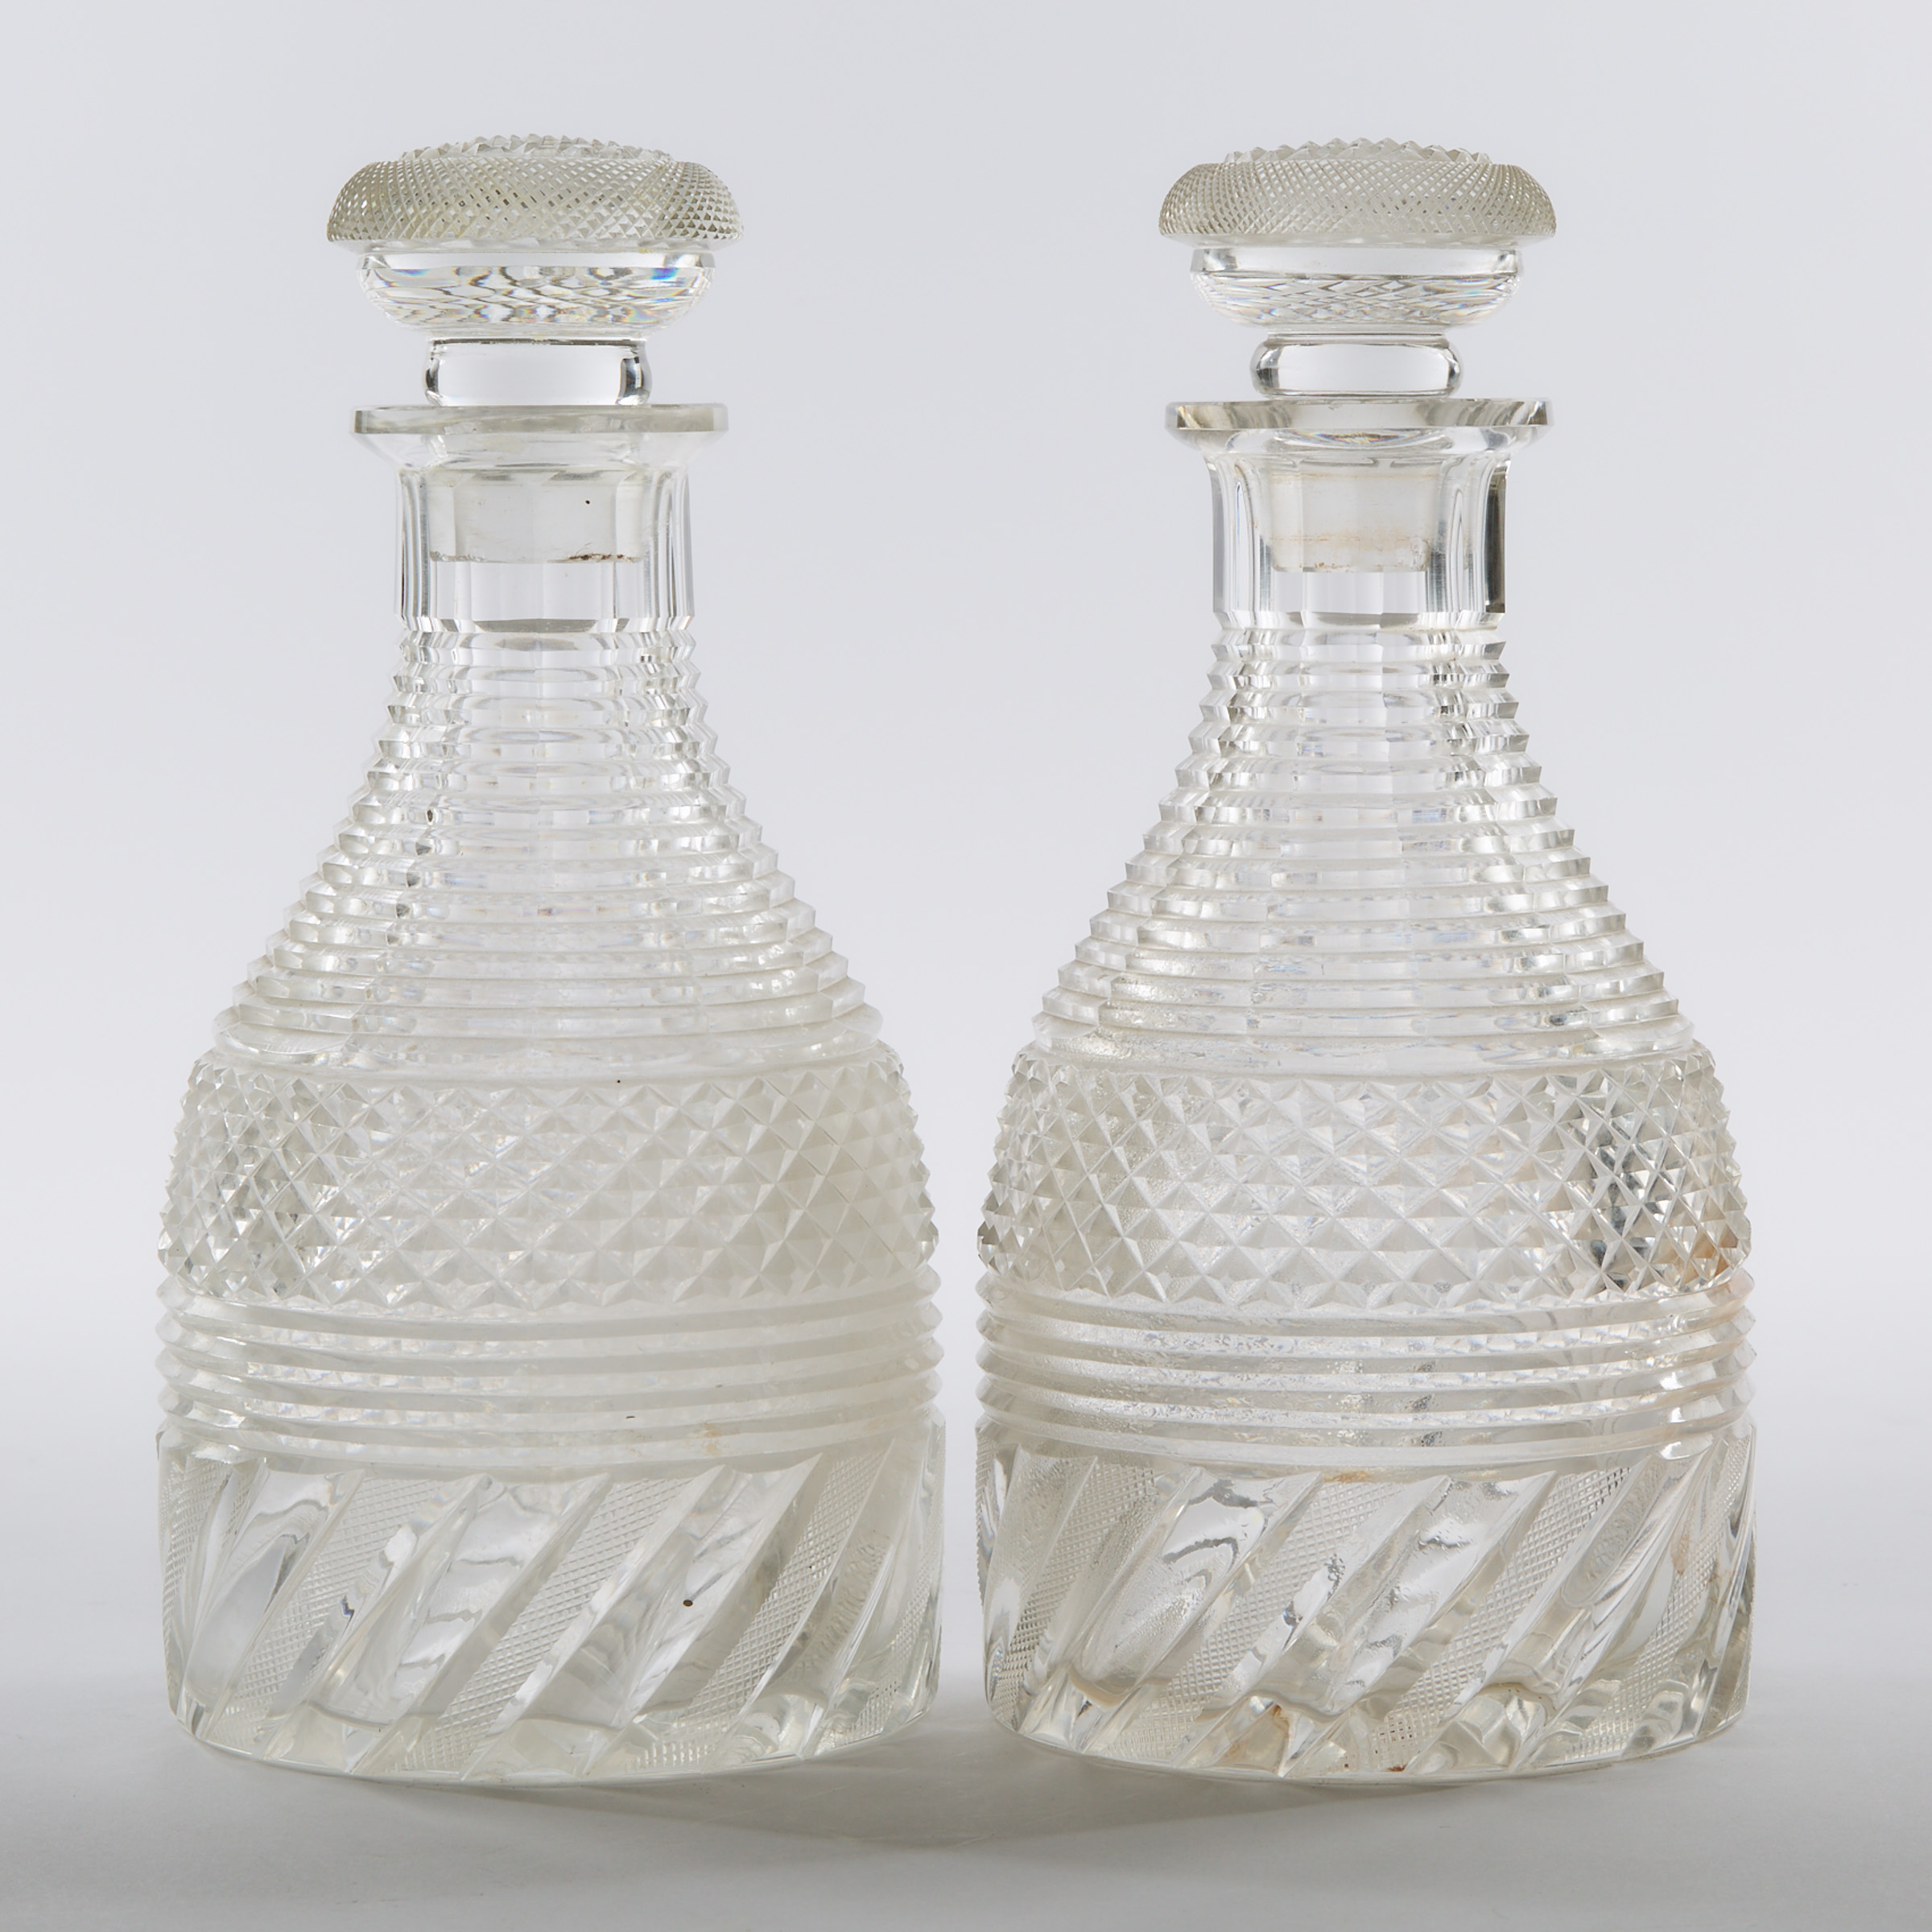 Pair of Anglo-Irish Cut Glass Mallet Shaped Decanters, 19th century